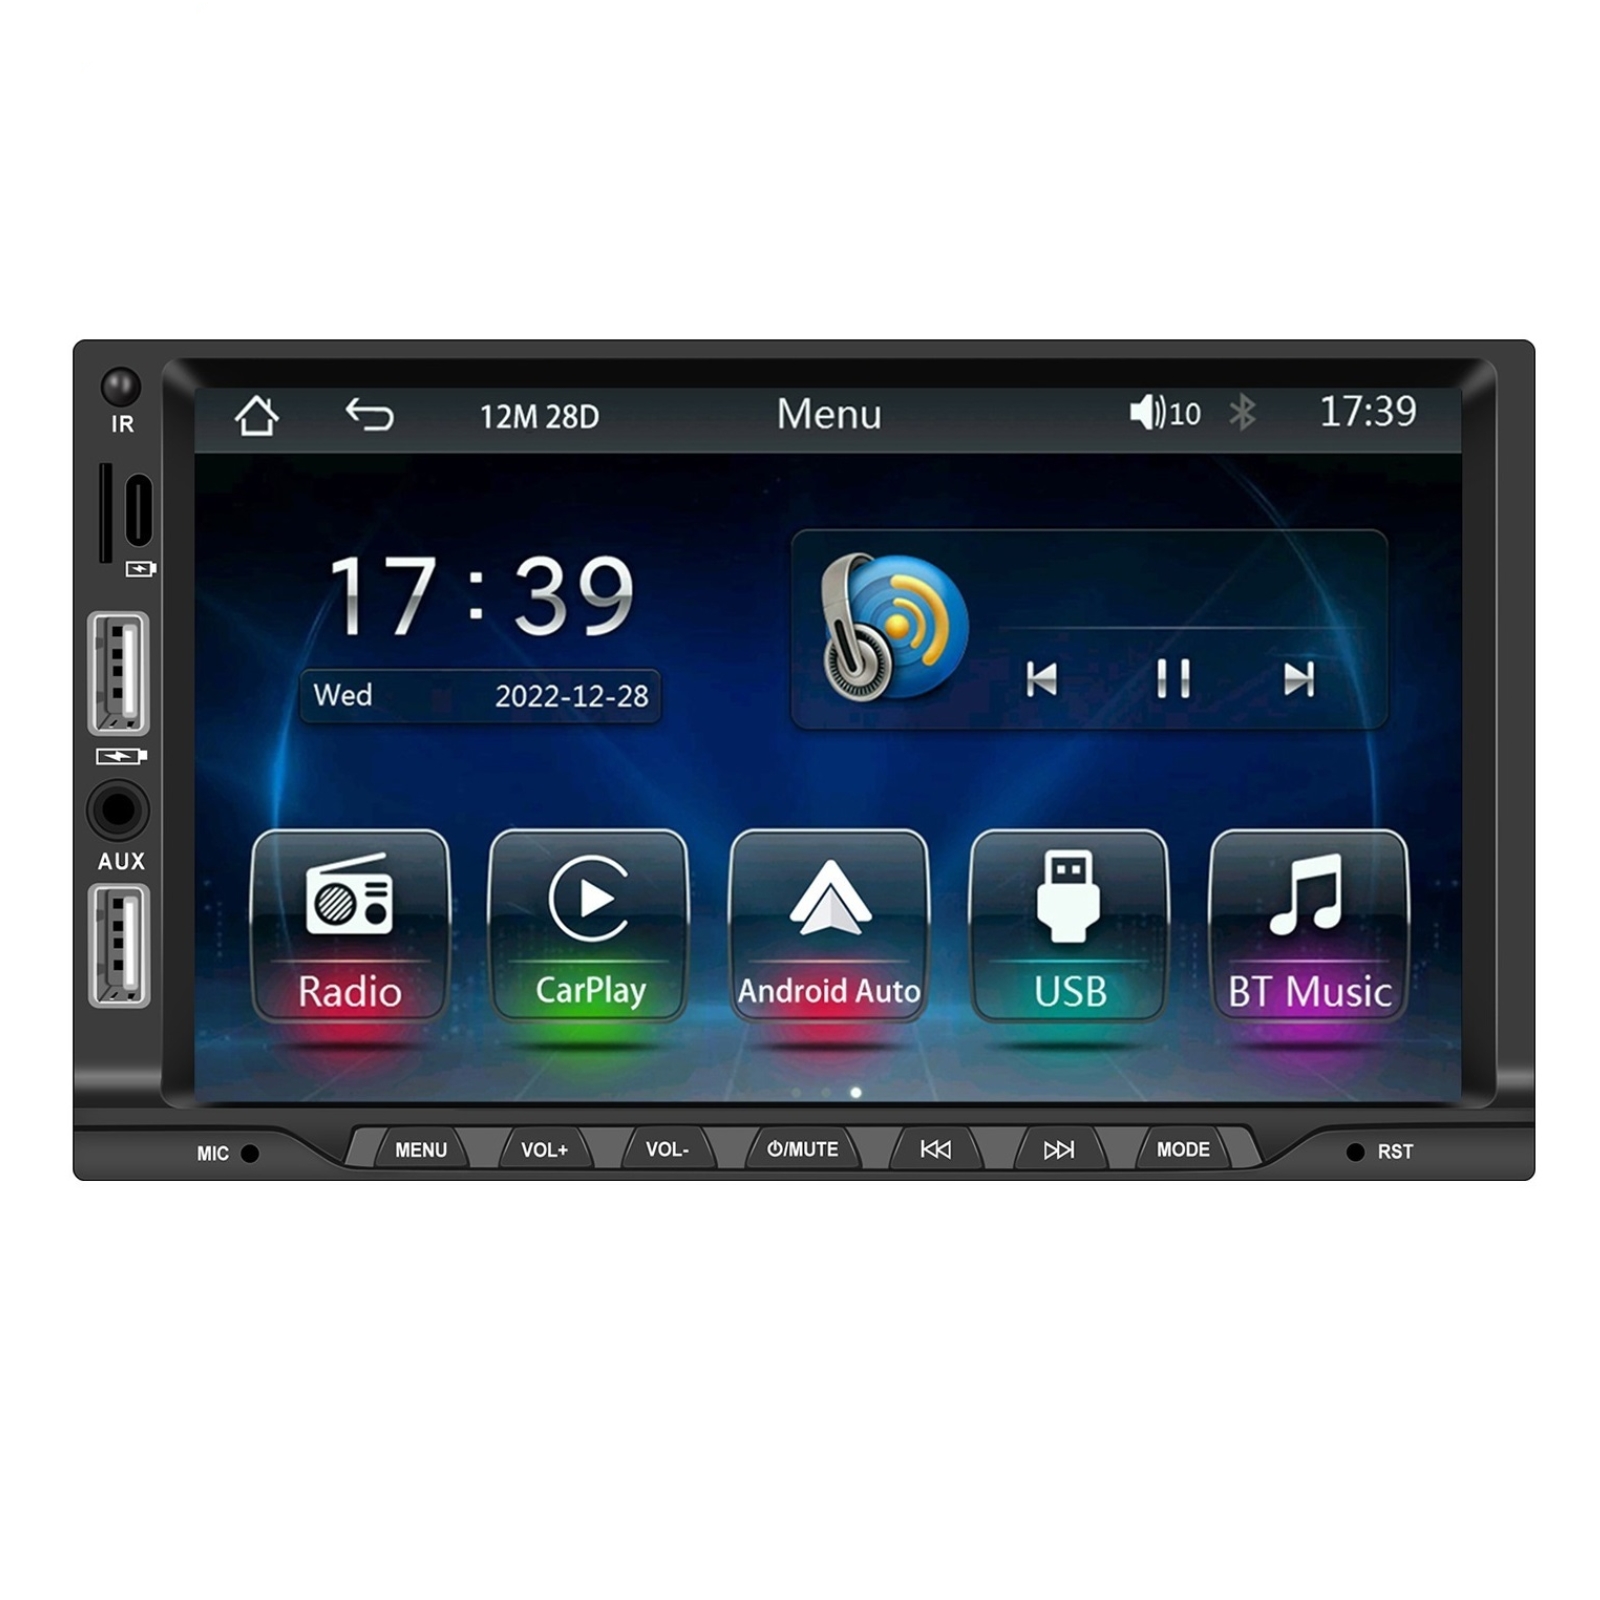 7-inch 2 Din Car Radio Bluetooth 5.1 Hands-free Mp5 Player for Carplay with Microphone